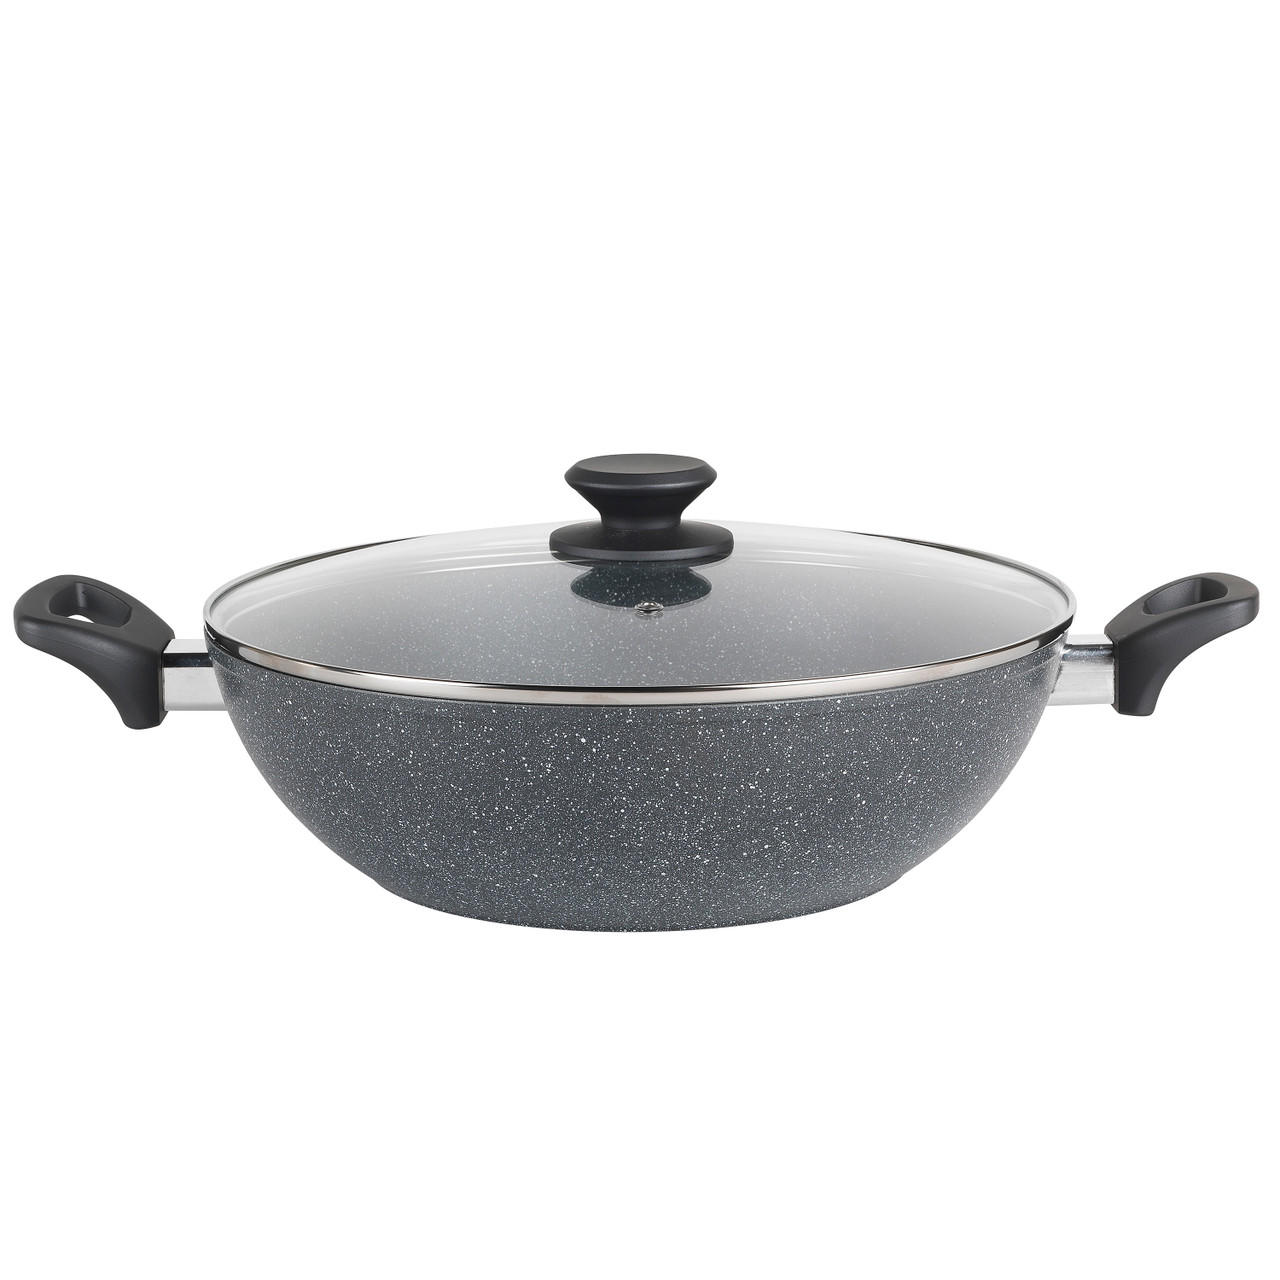 Marblestone Xylan Non-Stick 3 Quart Sauce Pan with Lid – Eco + Chef Kitchen